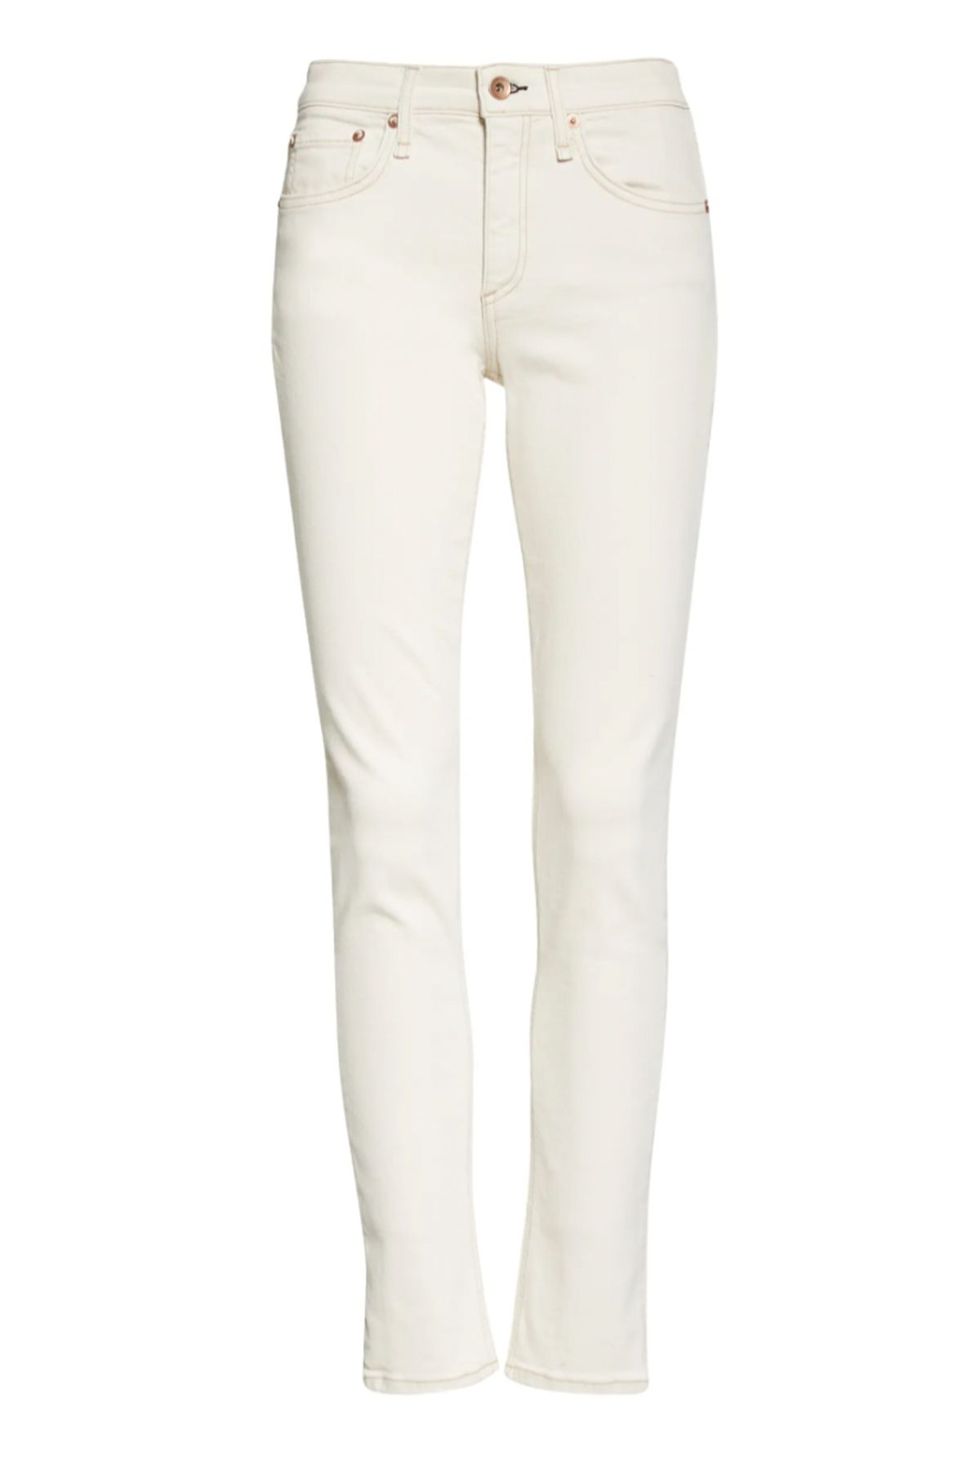 Rag and Bone White Jeans After Labor Day, Fall Fashion